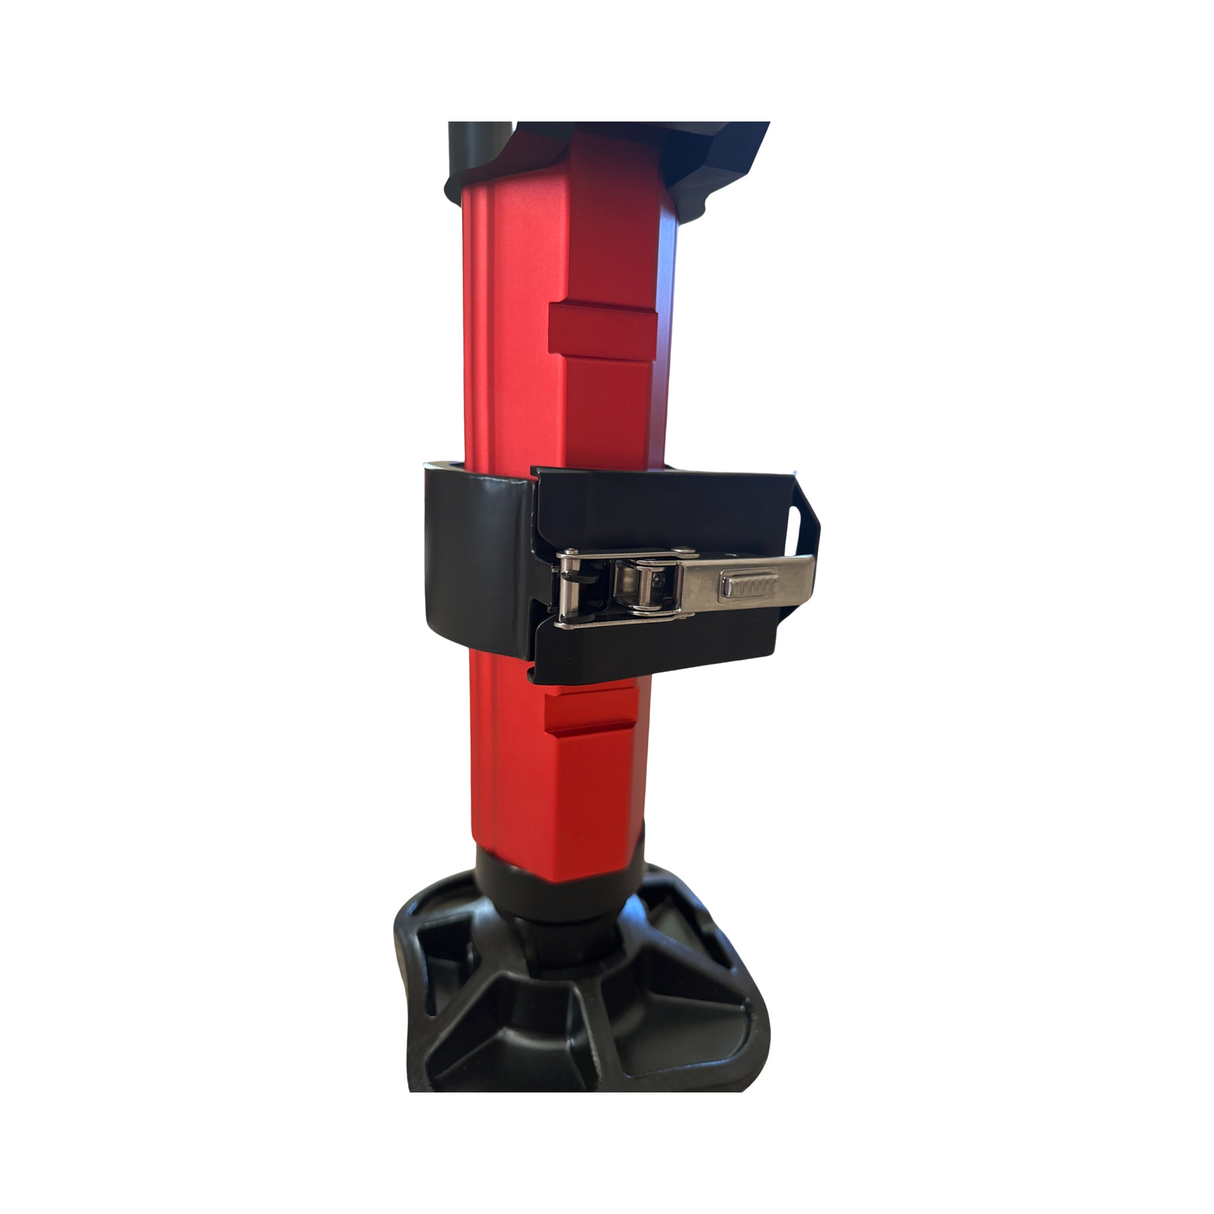 Ultimate Hydraulic Jack with Mounting Clamps.